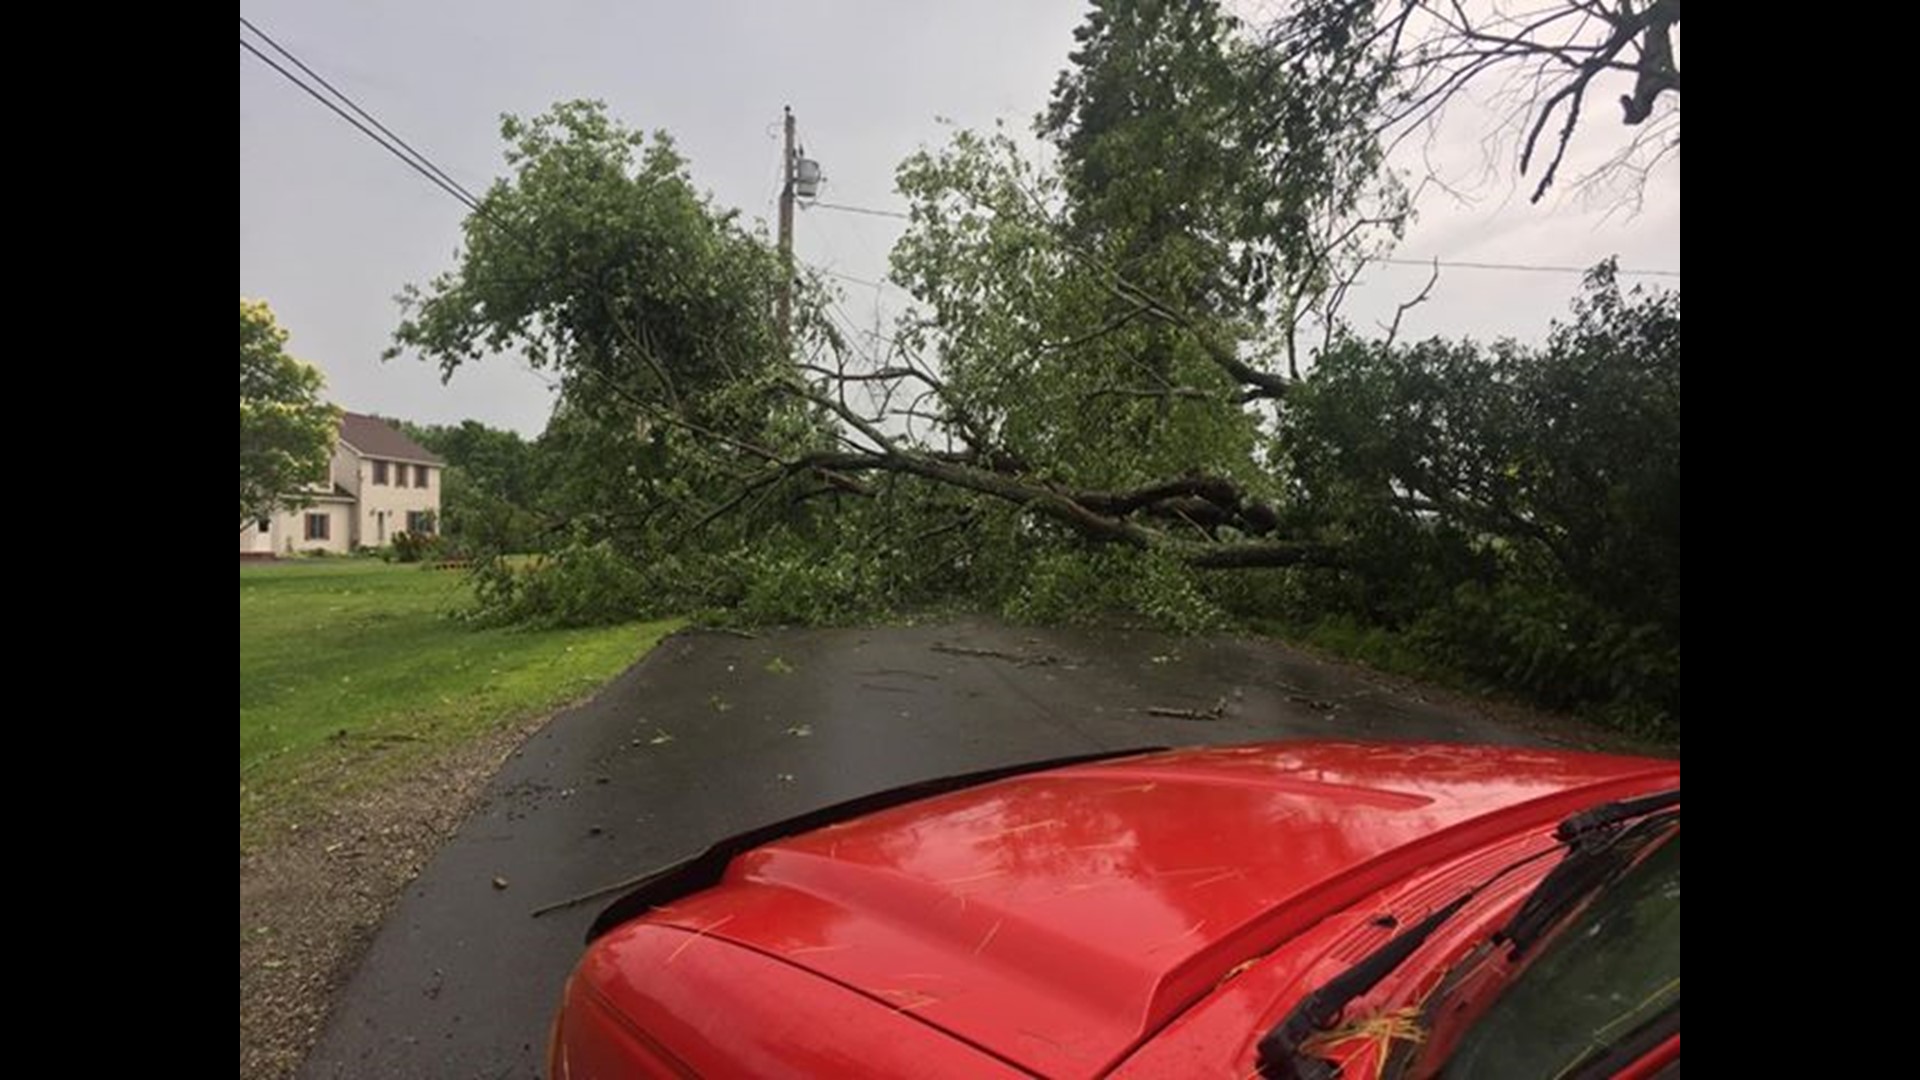 Viewer photos of storm damage and clouds across Maine | newscentermaine.com